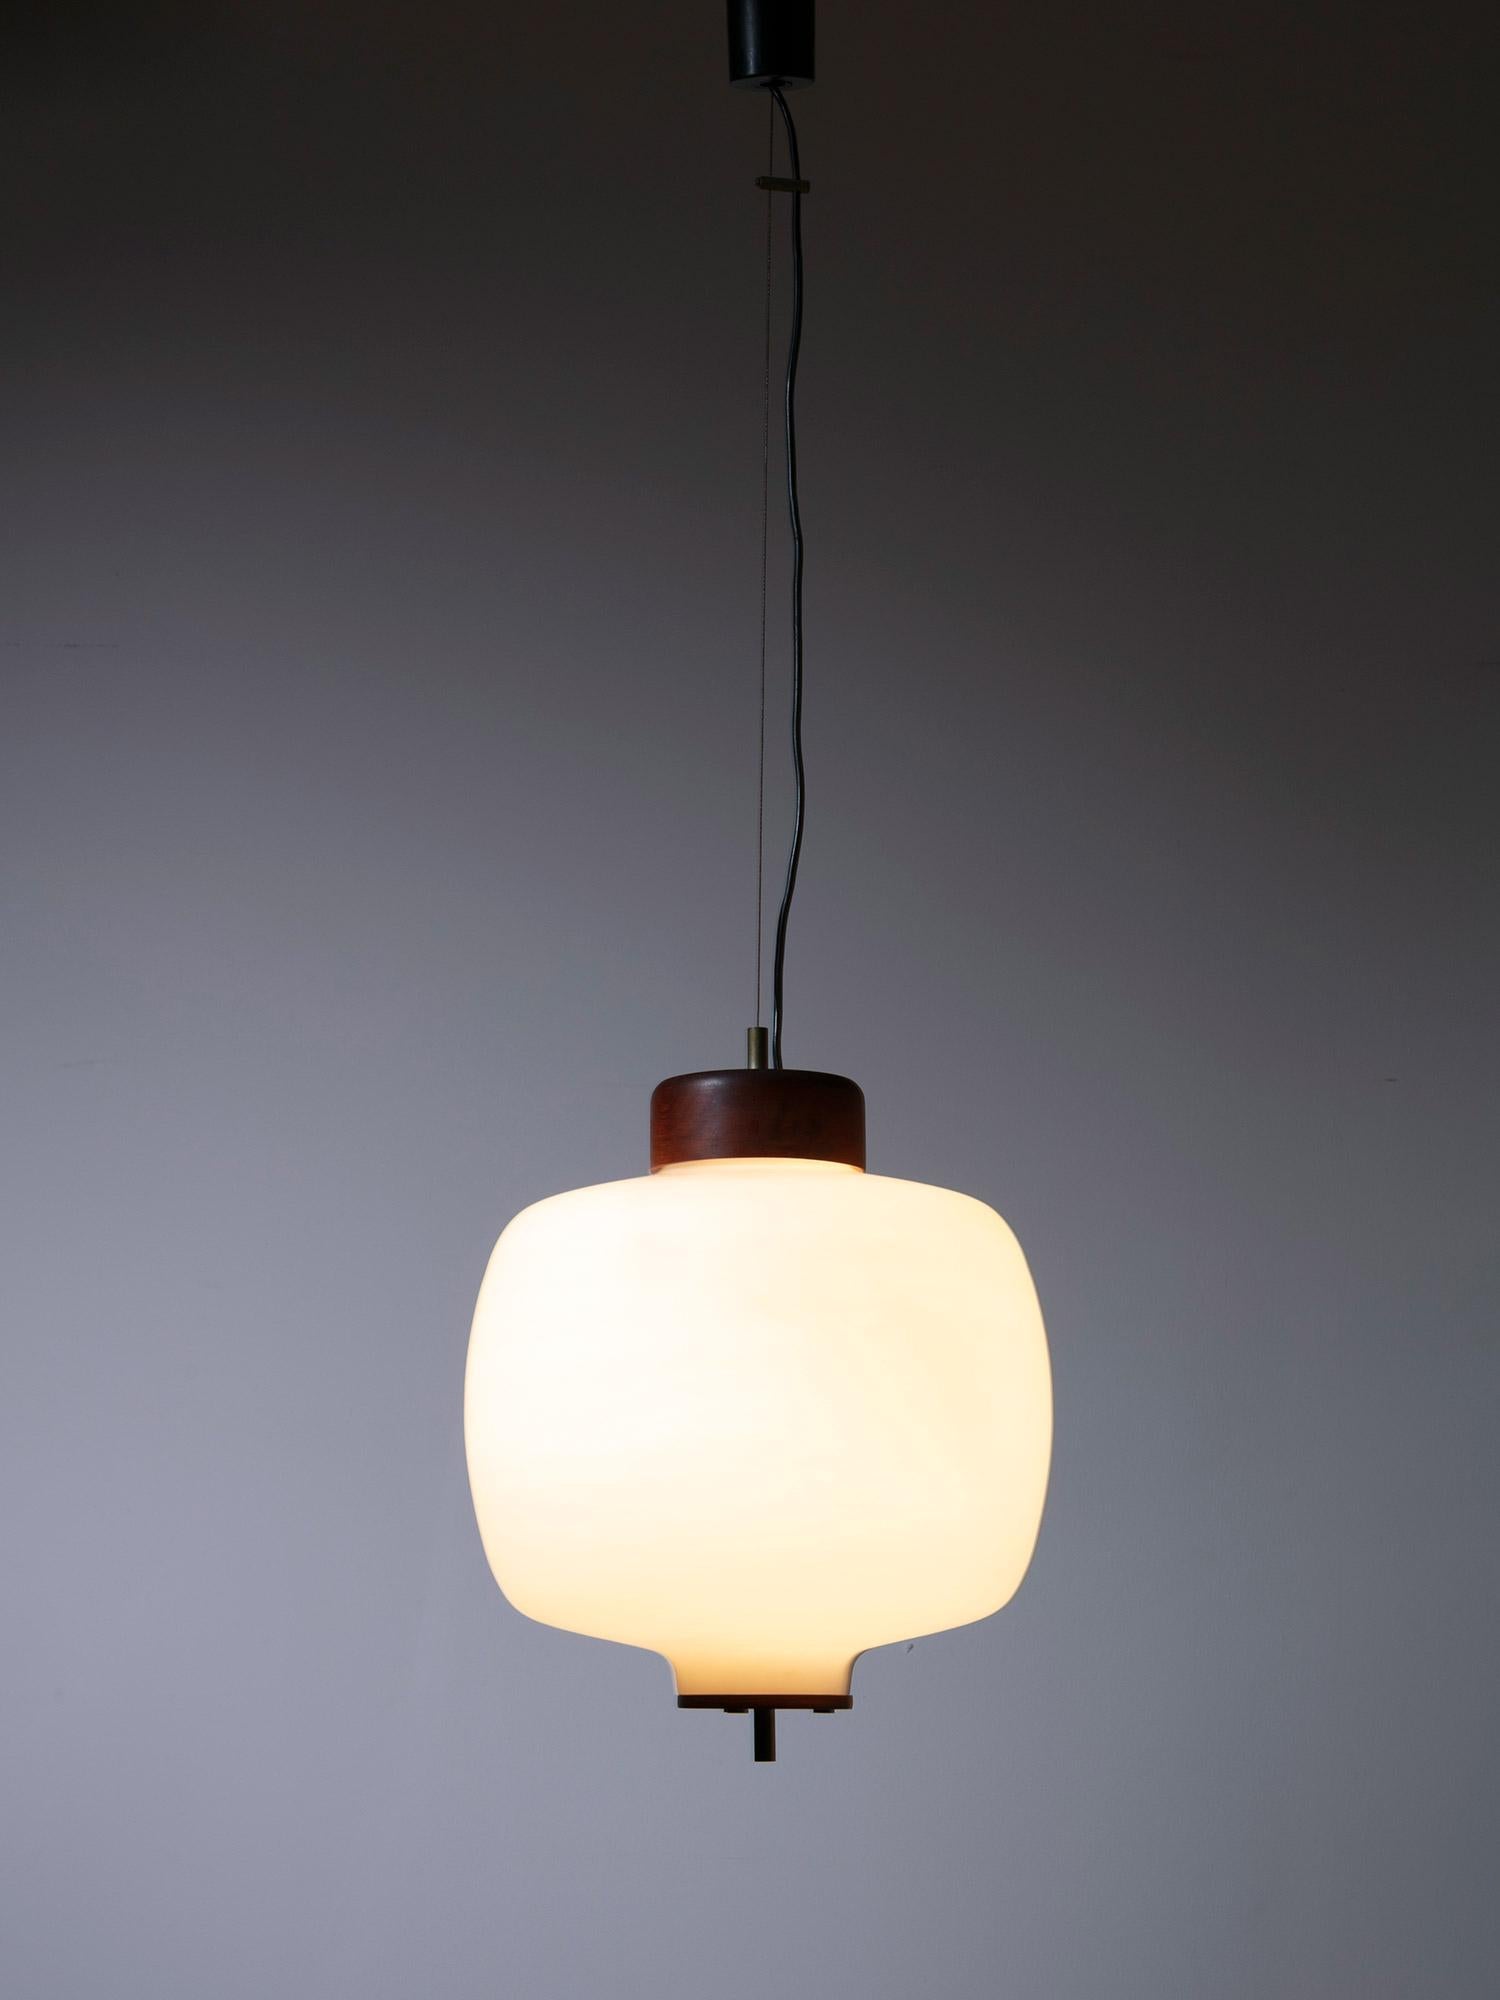 Opaline glass hanging lamp manufactured by Reggiani.
Teak and brass elements emphasizing the soft shape of the glass diffuser.